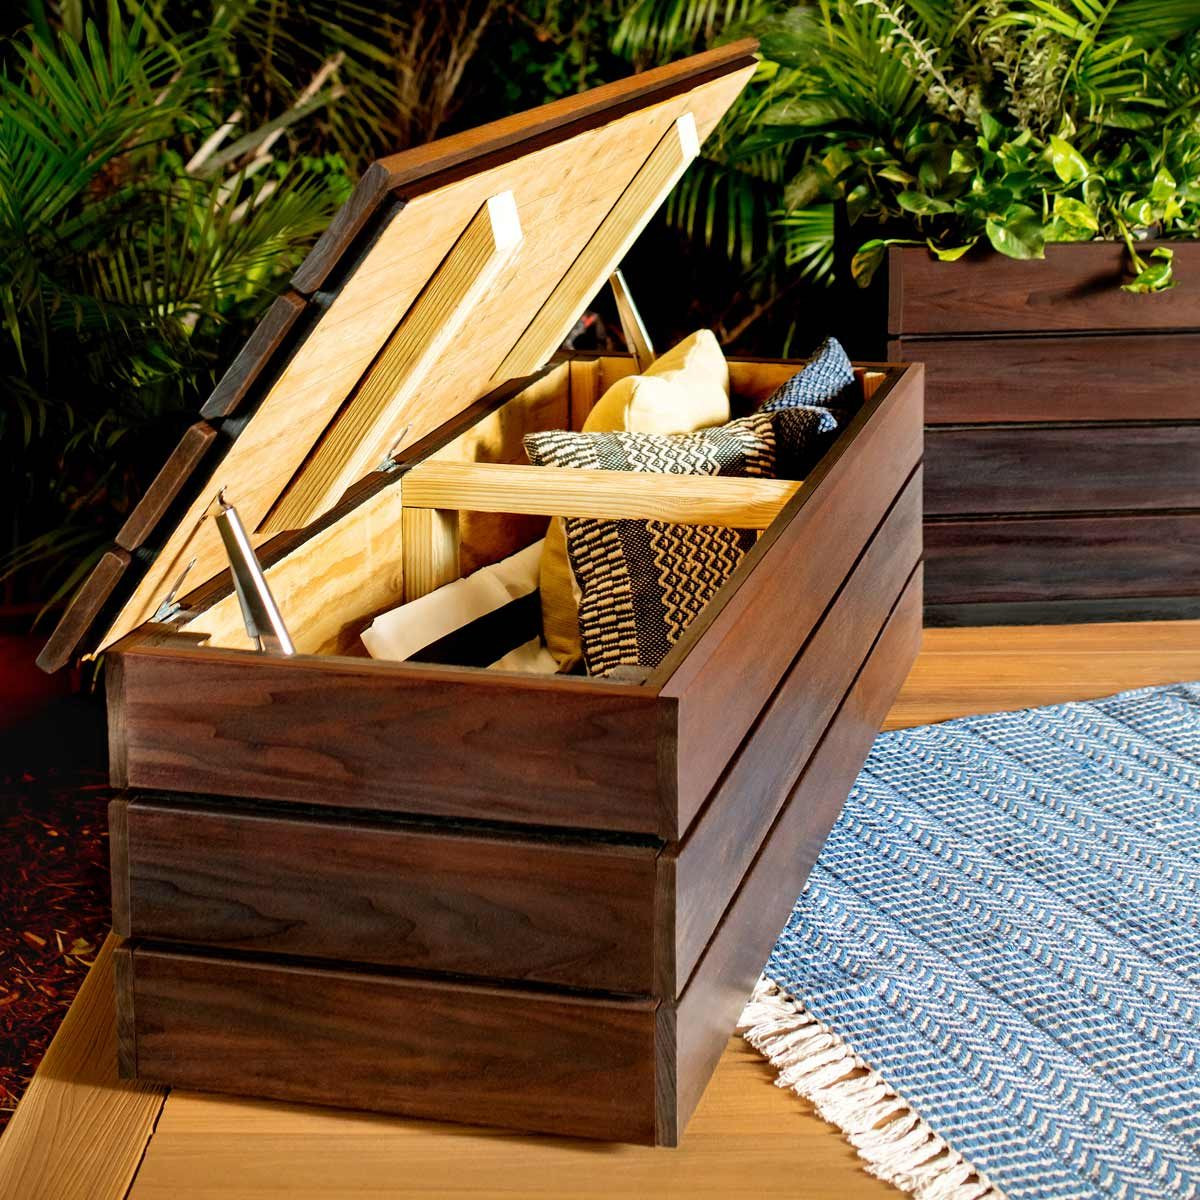 Home Storage Bench
 How to Build an Outdoor Storage Bench